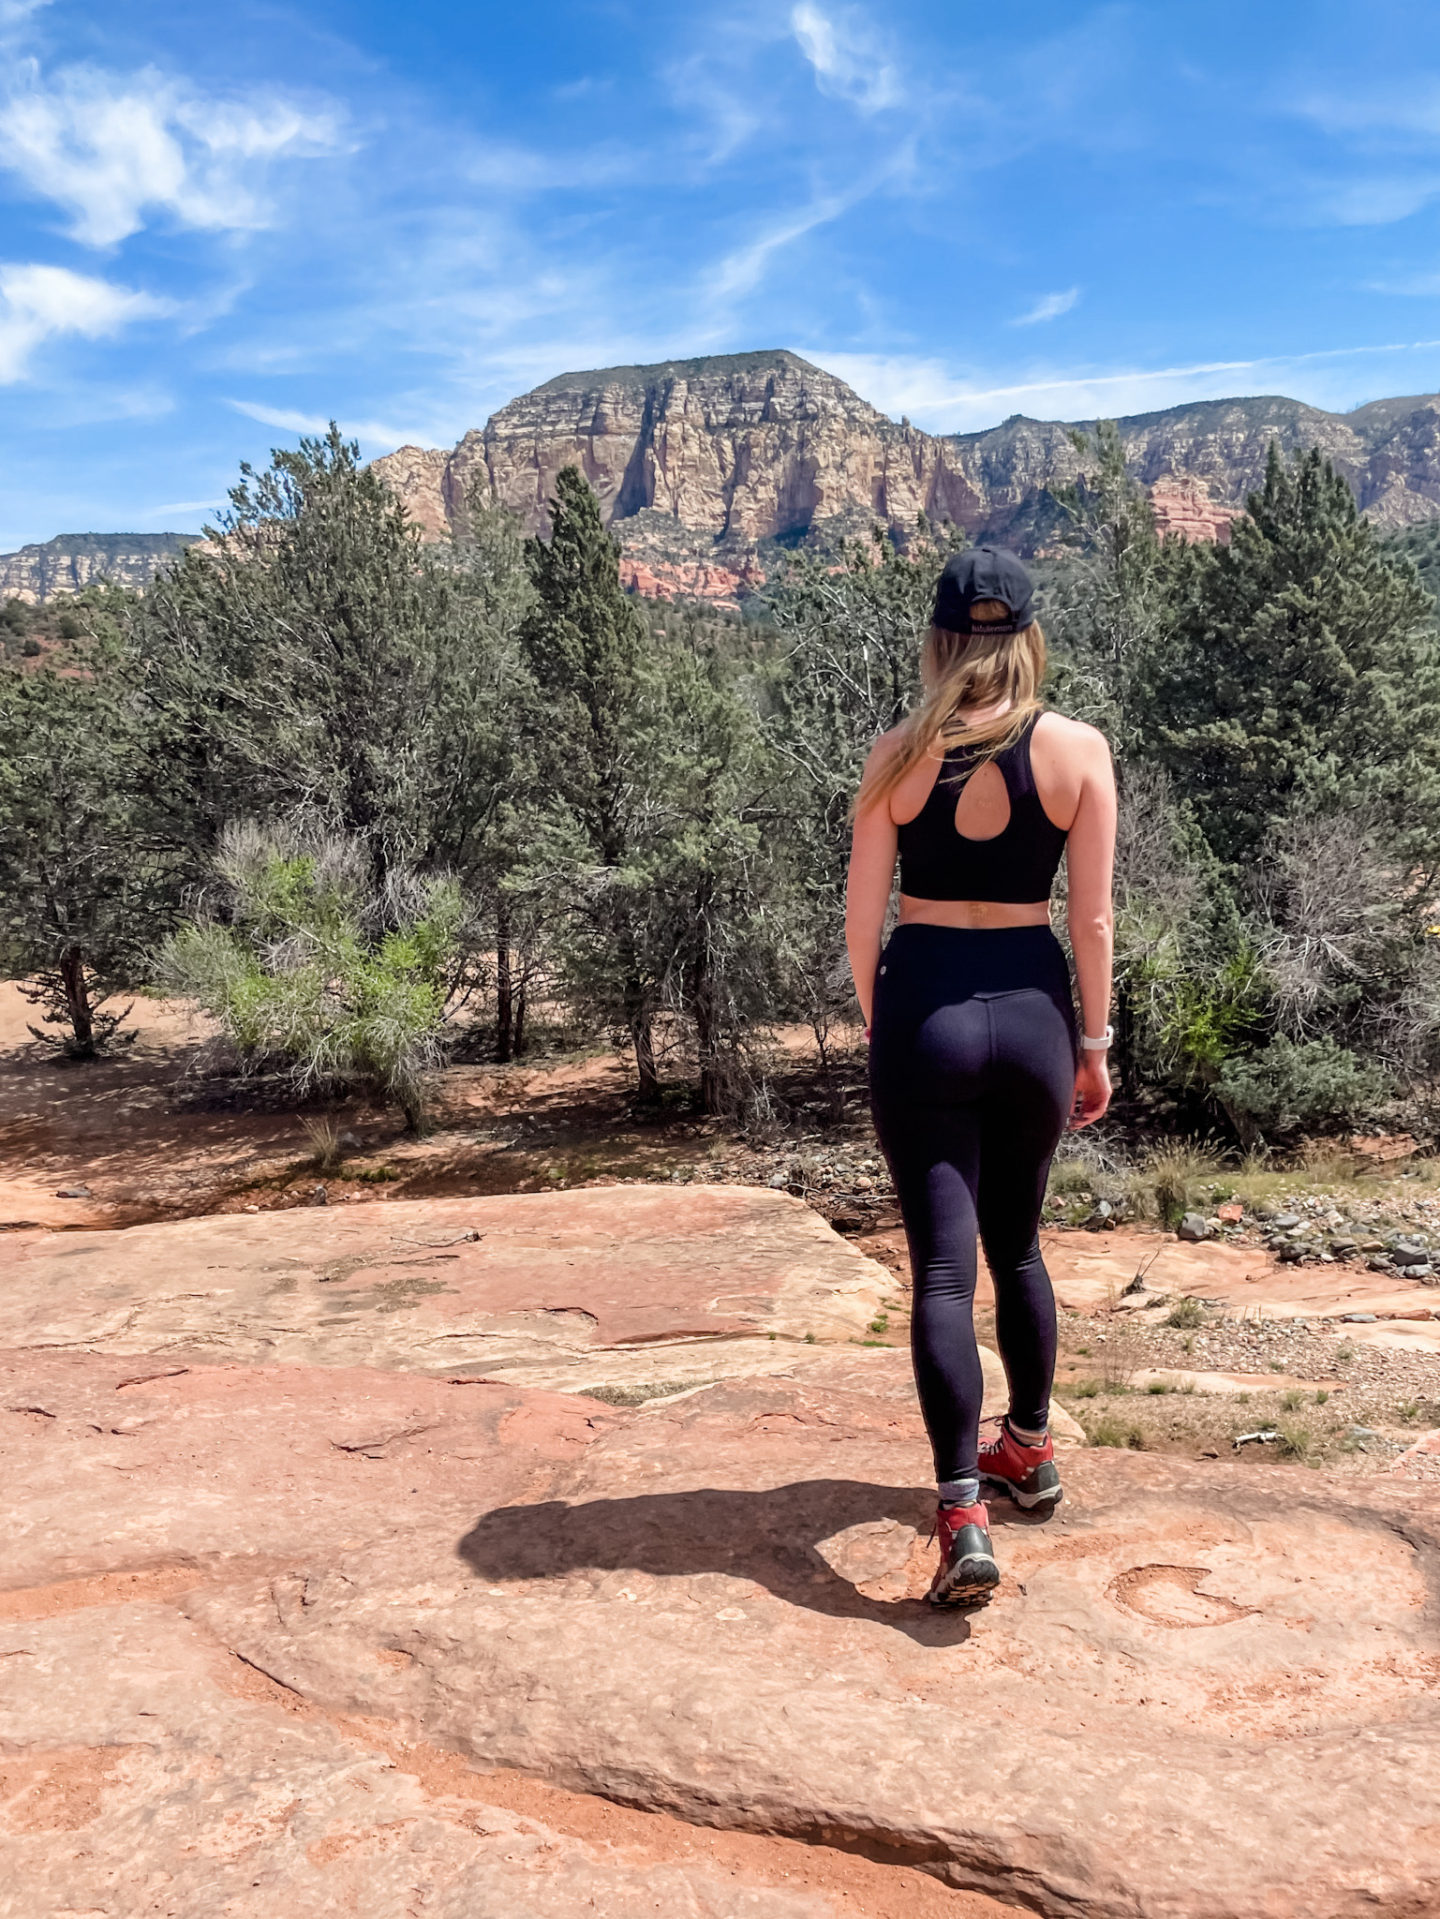 Sedona Bachelorette Party: Girls Gone (Into The) Wild